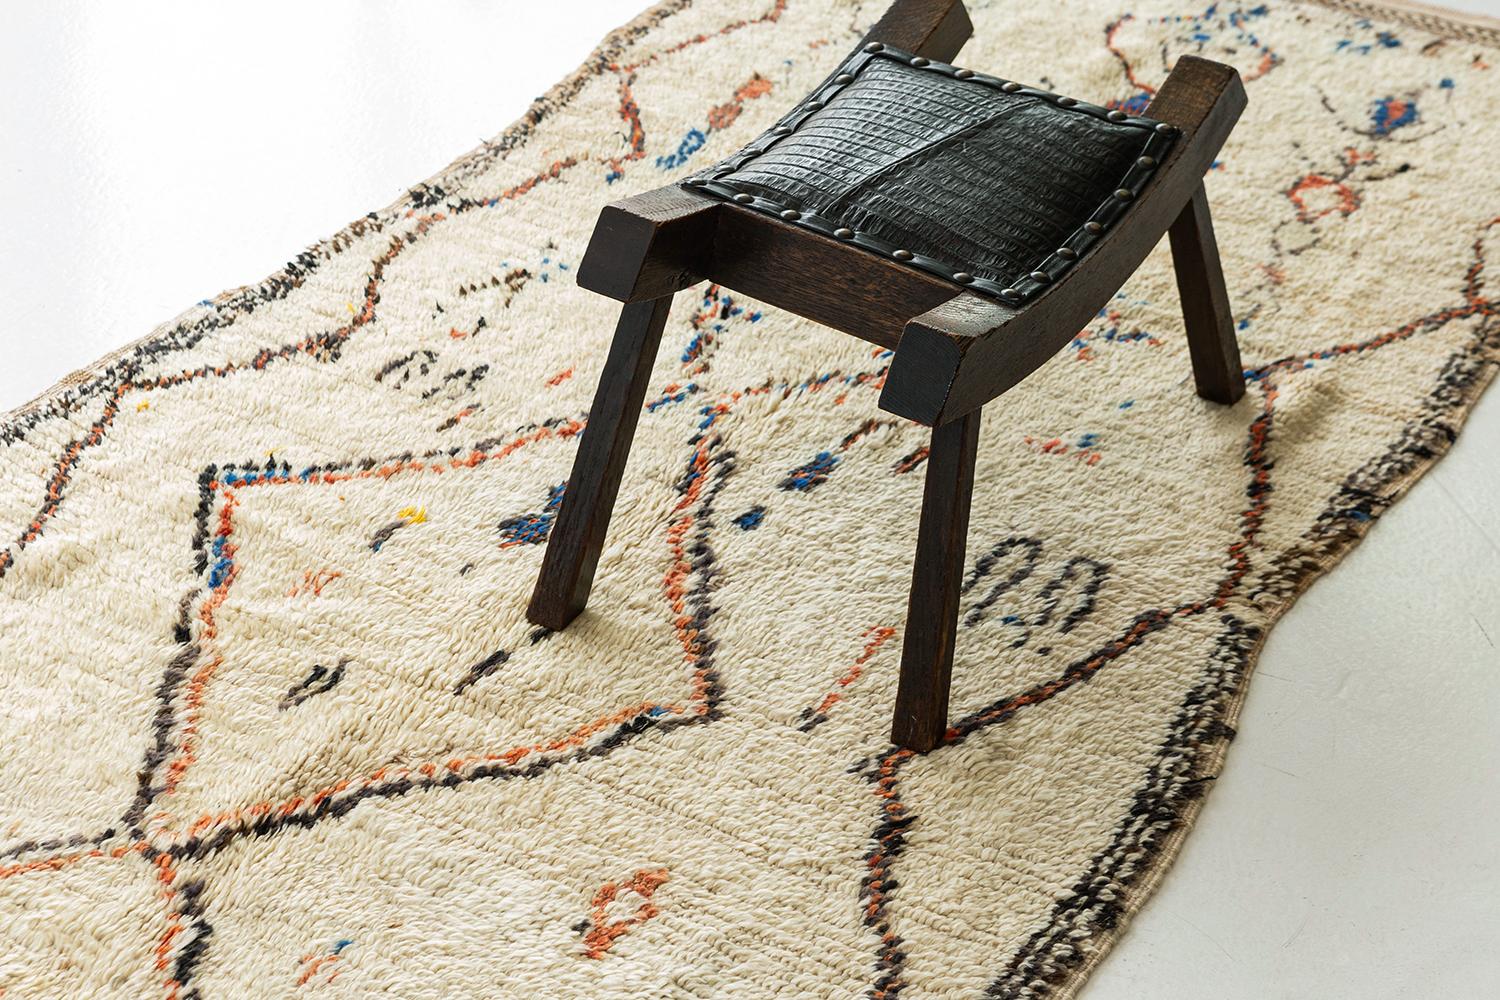 Ivory pile rug with mercurially drawn diamond and zigzag designs and archaic motifs in brilliant azure, apricot and natural brown. A unique vintage tribal rug from the Atlas Mountains of Morocco.